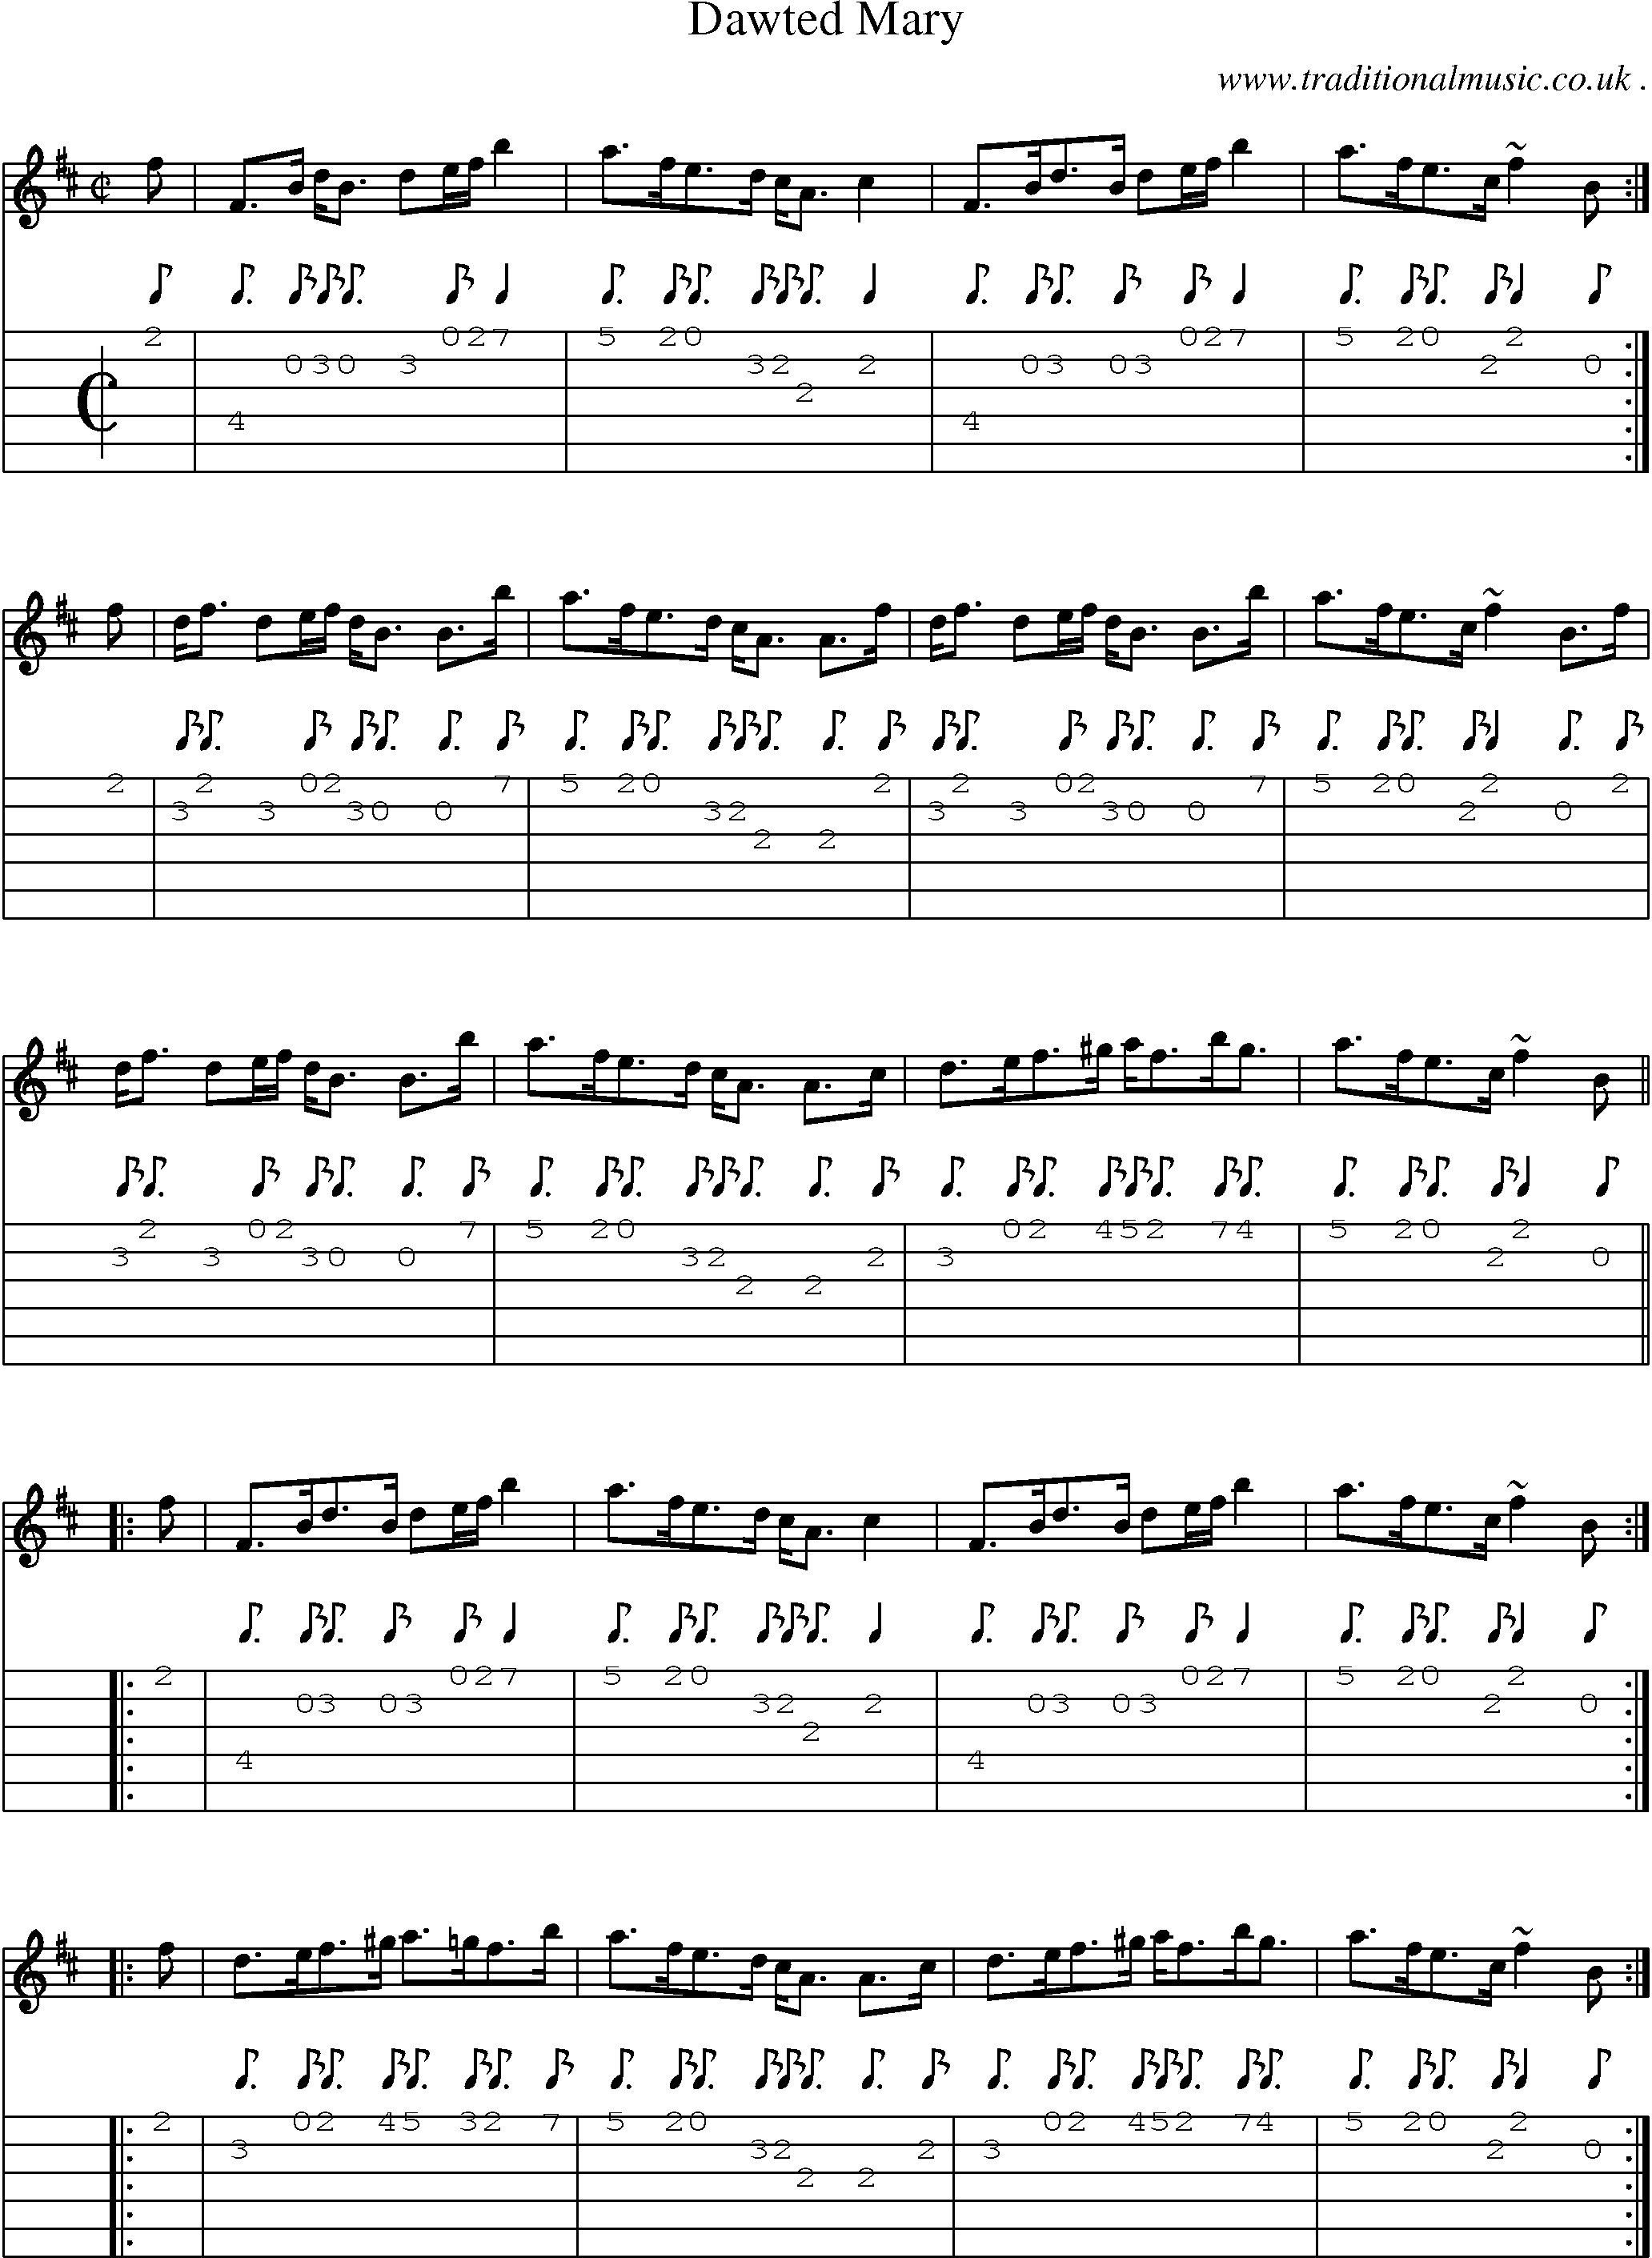 Sheet-music  score, Chords and Guitar Tabs for Dawted Mary